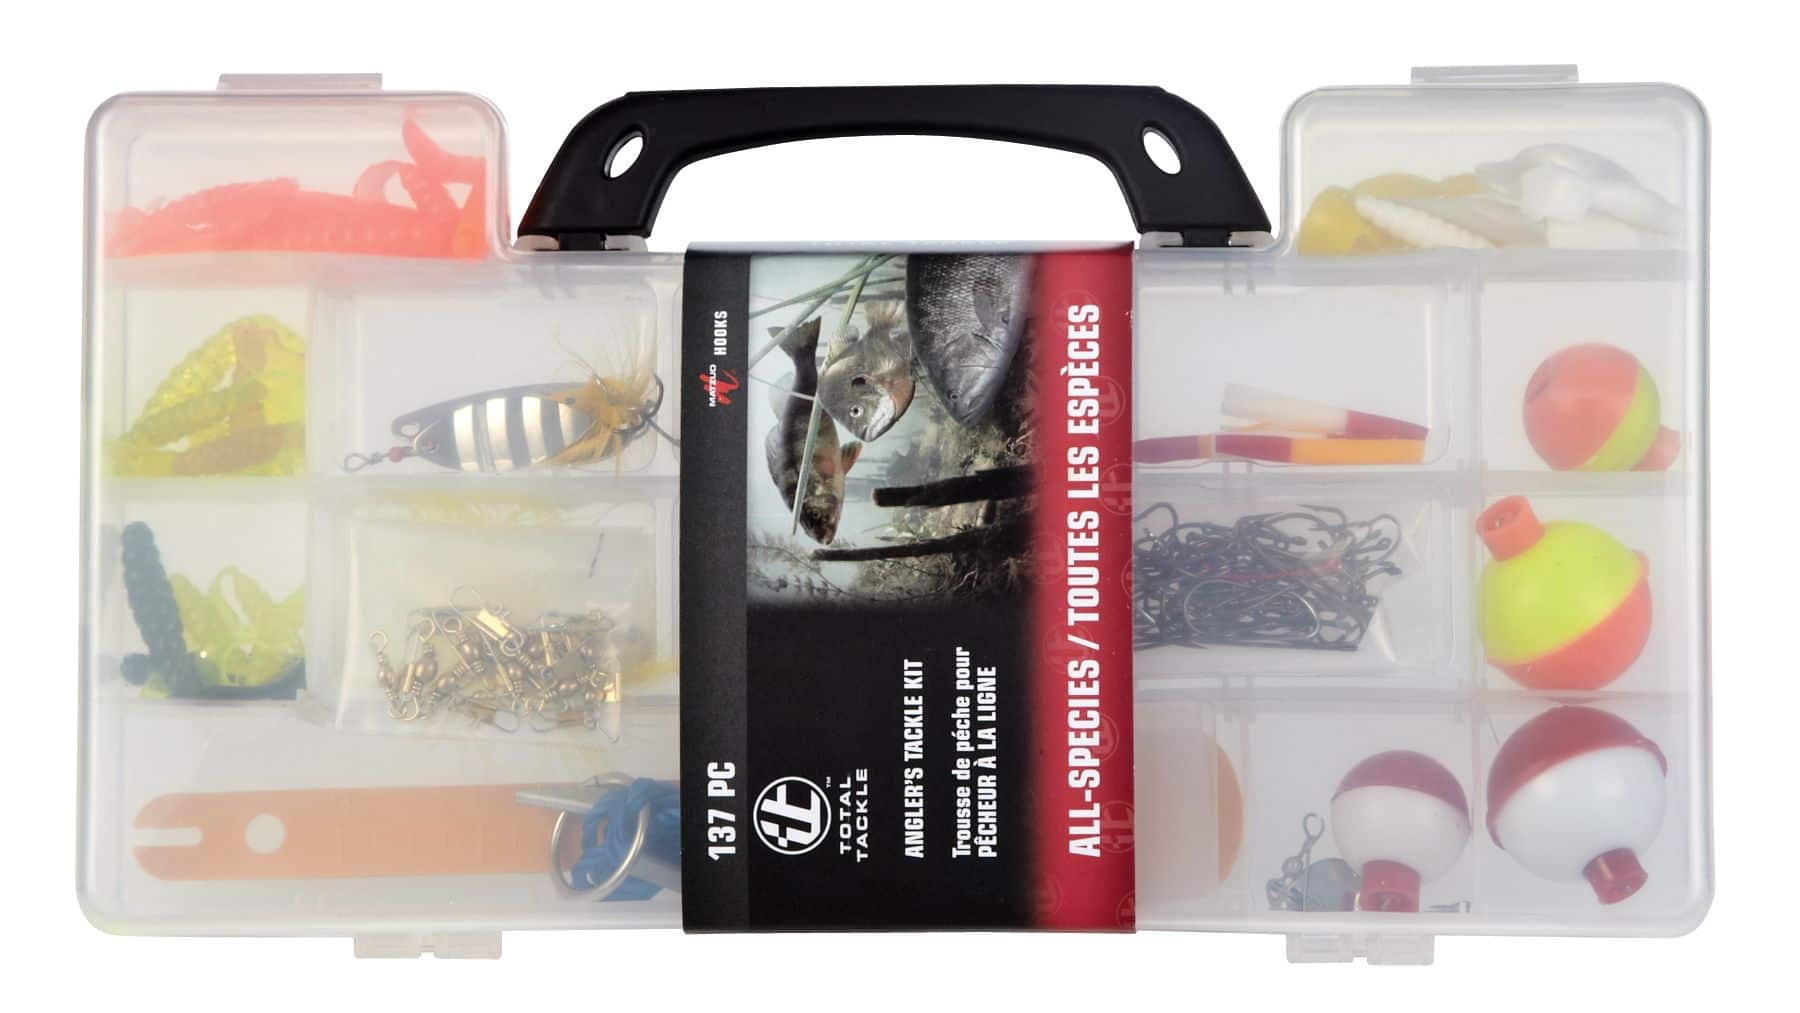 Freshwater Fishing Kit Tackle Box with Tackle Included Pliers Lures  Spinners Spoon Bait Worms Jigs Hooks Starter Equipment Gifts & Gear to Fish  for